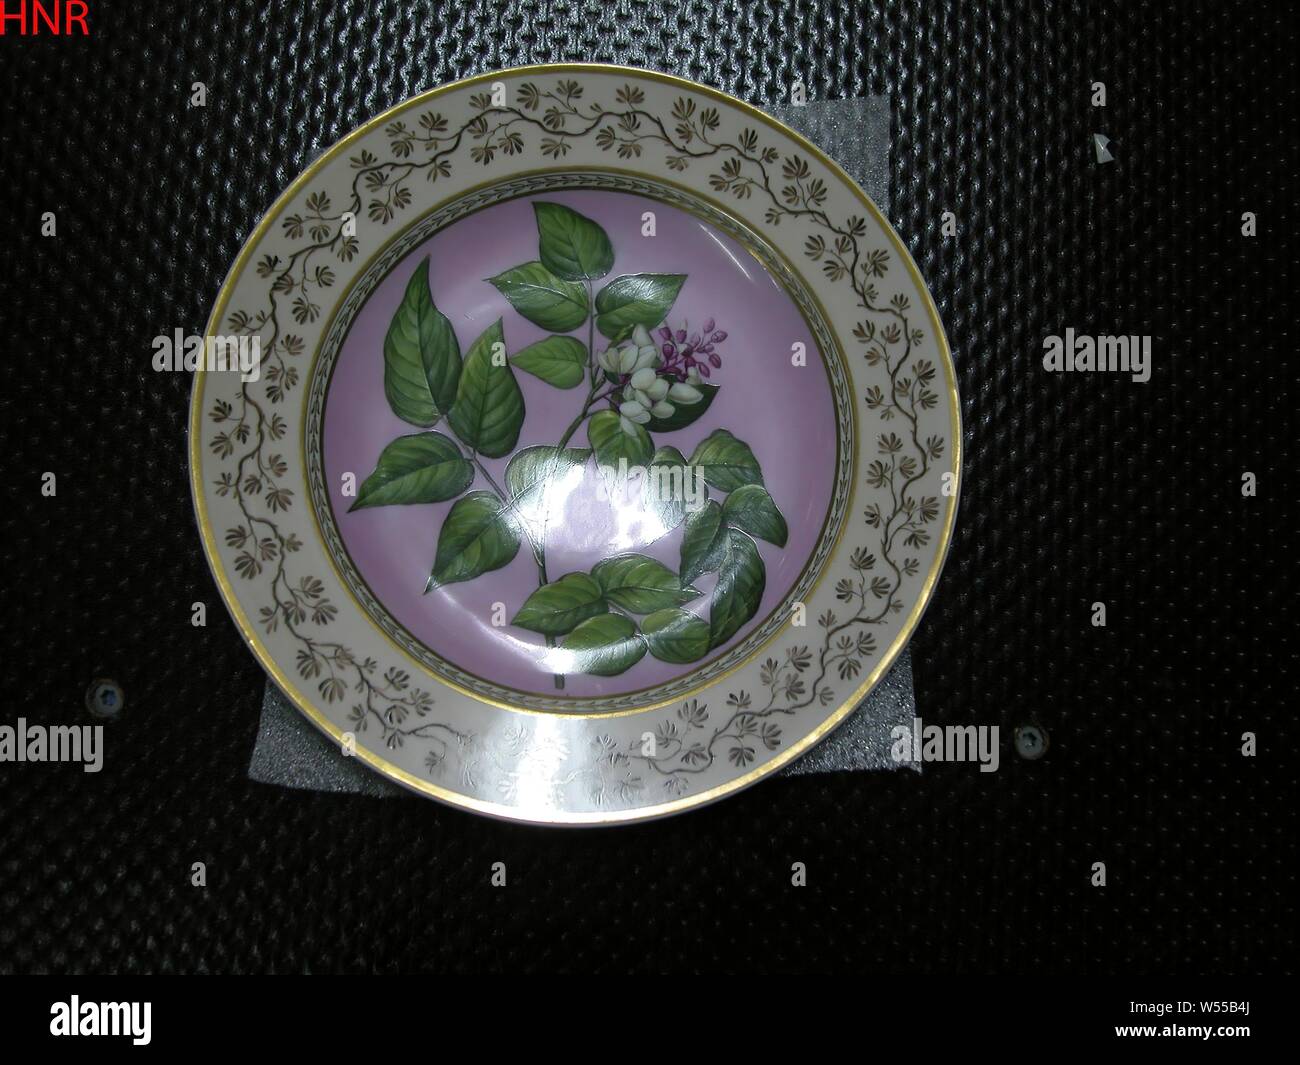 Plate with a flower spray, Porcelain plate, painted on the glaze in pink, green, yellow, purple, brown, black and gold. On the shelf a flower branch on a pink background. The wall with a narrow decorative band and on the edge a continuous leaf tendril with golden lines. On the underside the inscription 'Pongamia glabra / Grandes Indes'. Marked on the bottom with the scepter, the red eagle, a scepter and a globe in its claws, with K.P.M. and the number 32 III., Königliche Porzellan Manufaktur, Berlin, c. 1825 - c. 1835, porcelain (material), glaze, gold (metal), vitrification, h 3.1 cm d 24.3 Stock Photo